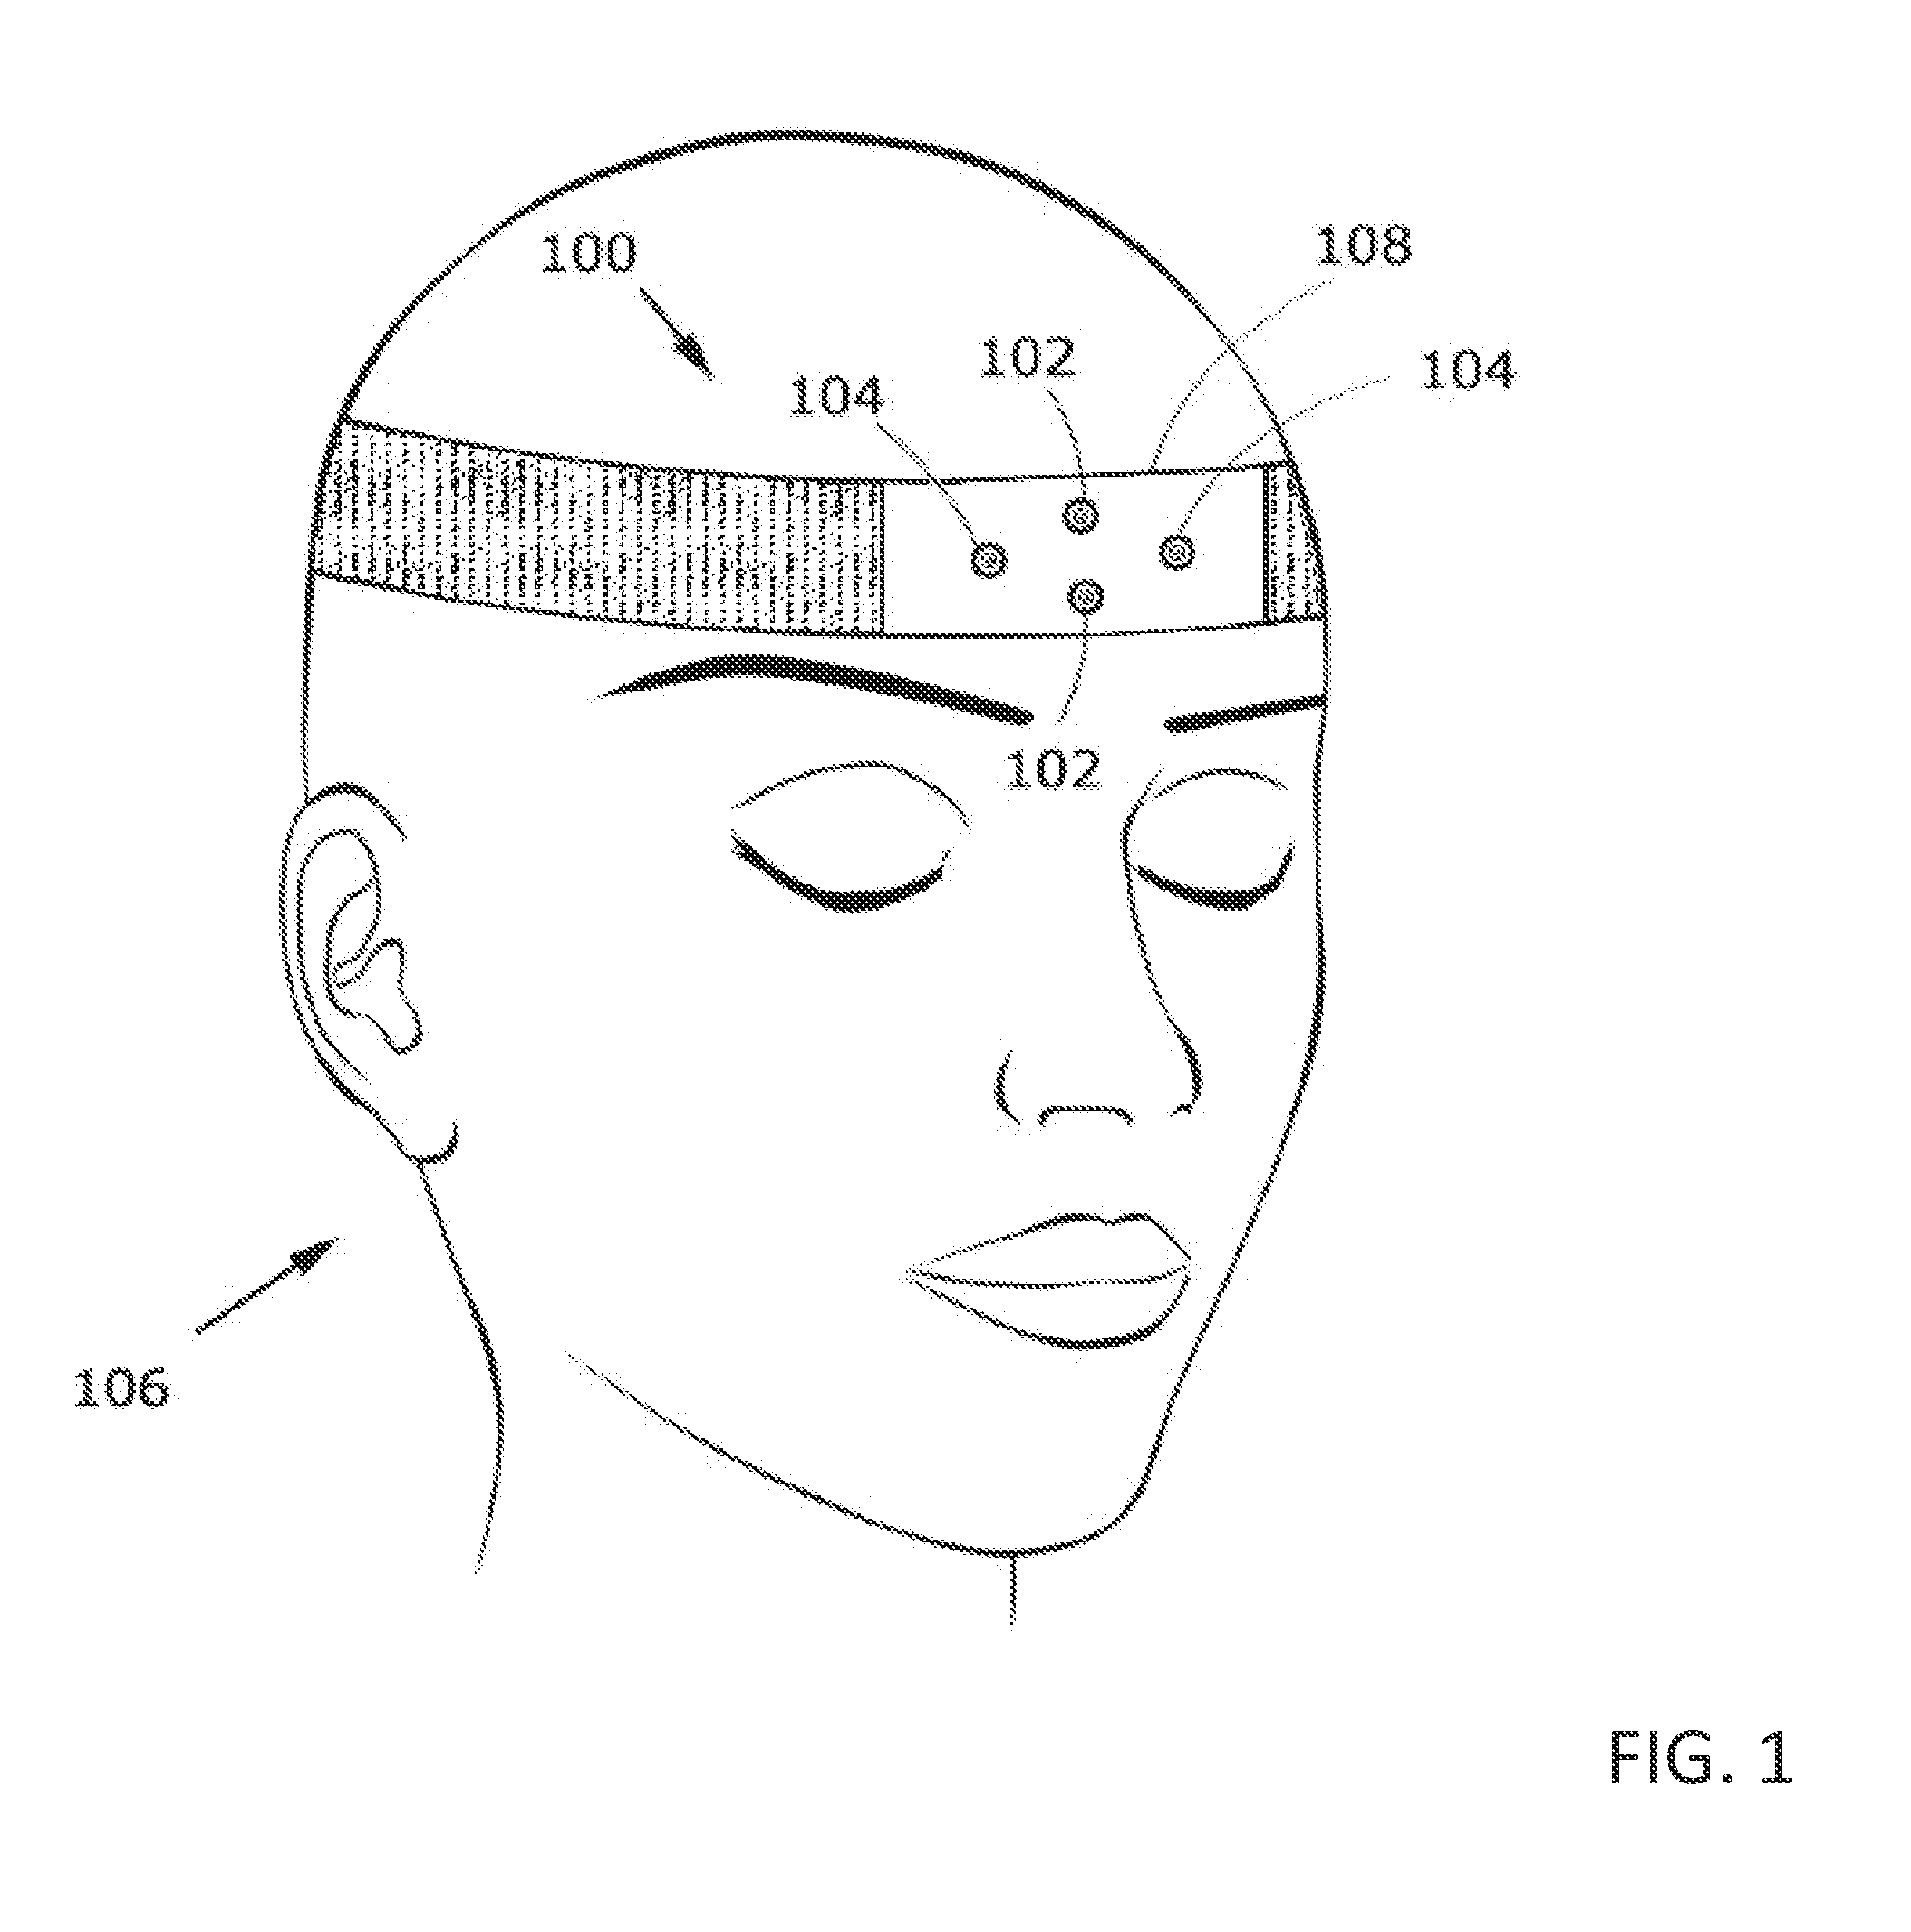 Dual-Purpose Sleep-Wearable Headgear for Monitoring and Stimulating the Brain of a Sleeping Person